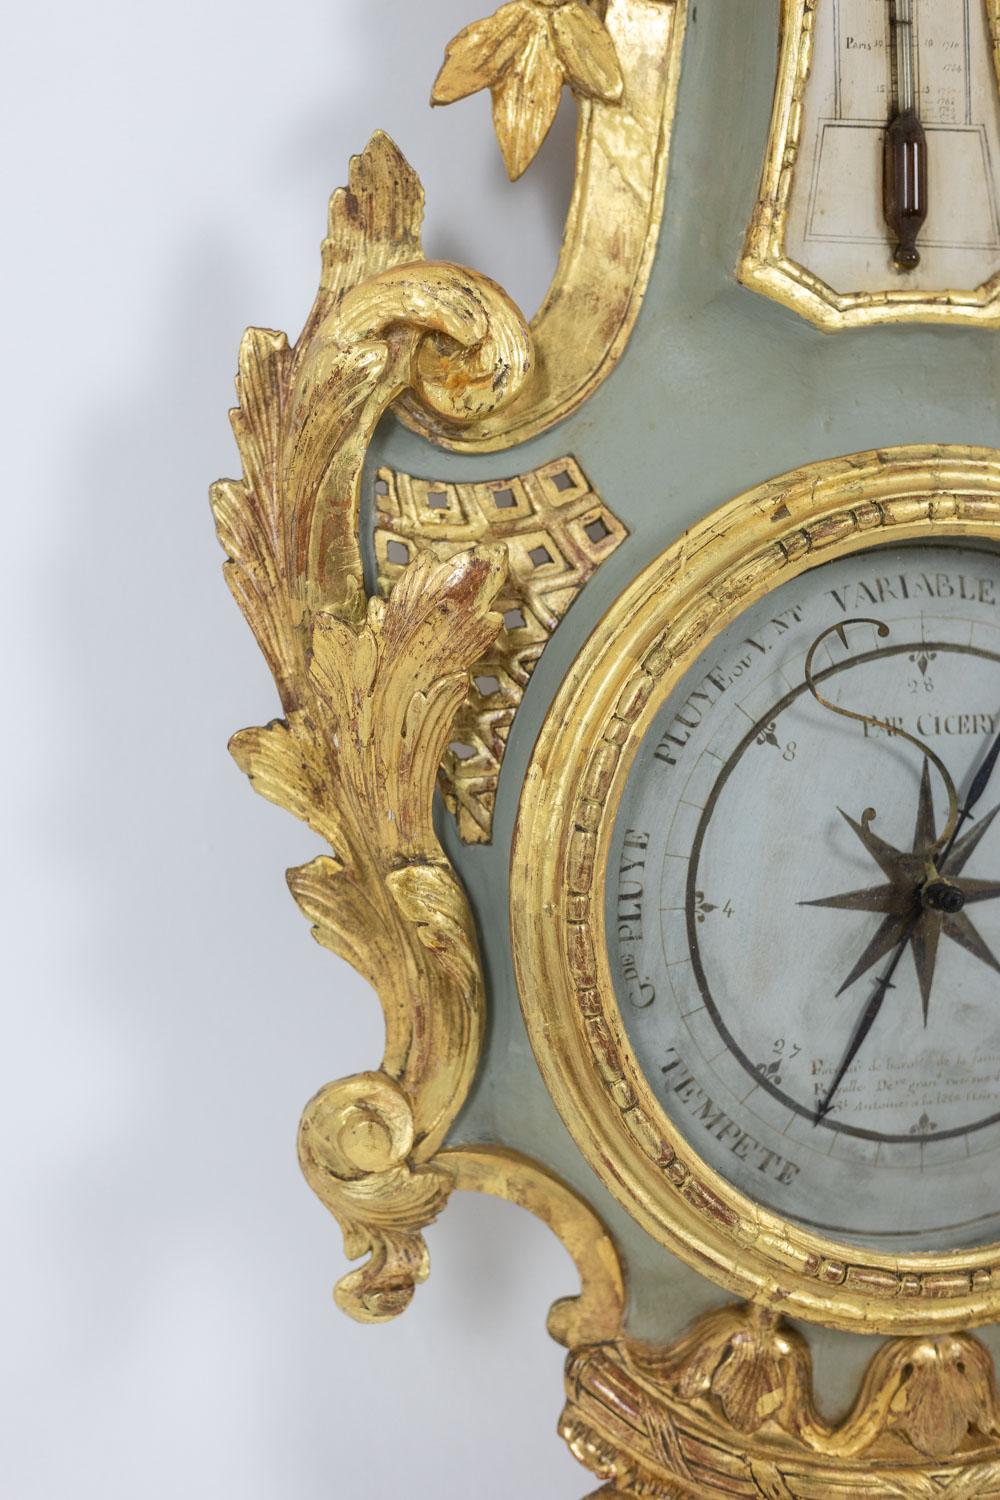 French Cicery. Barometer in carved and gilded wood. 18th century period. For Sale